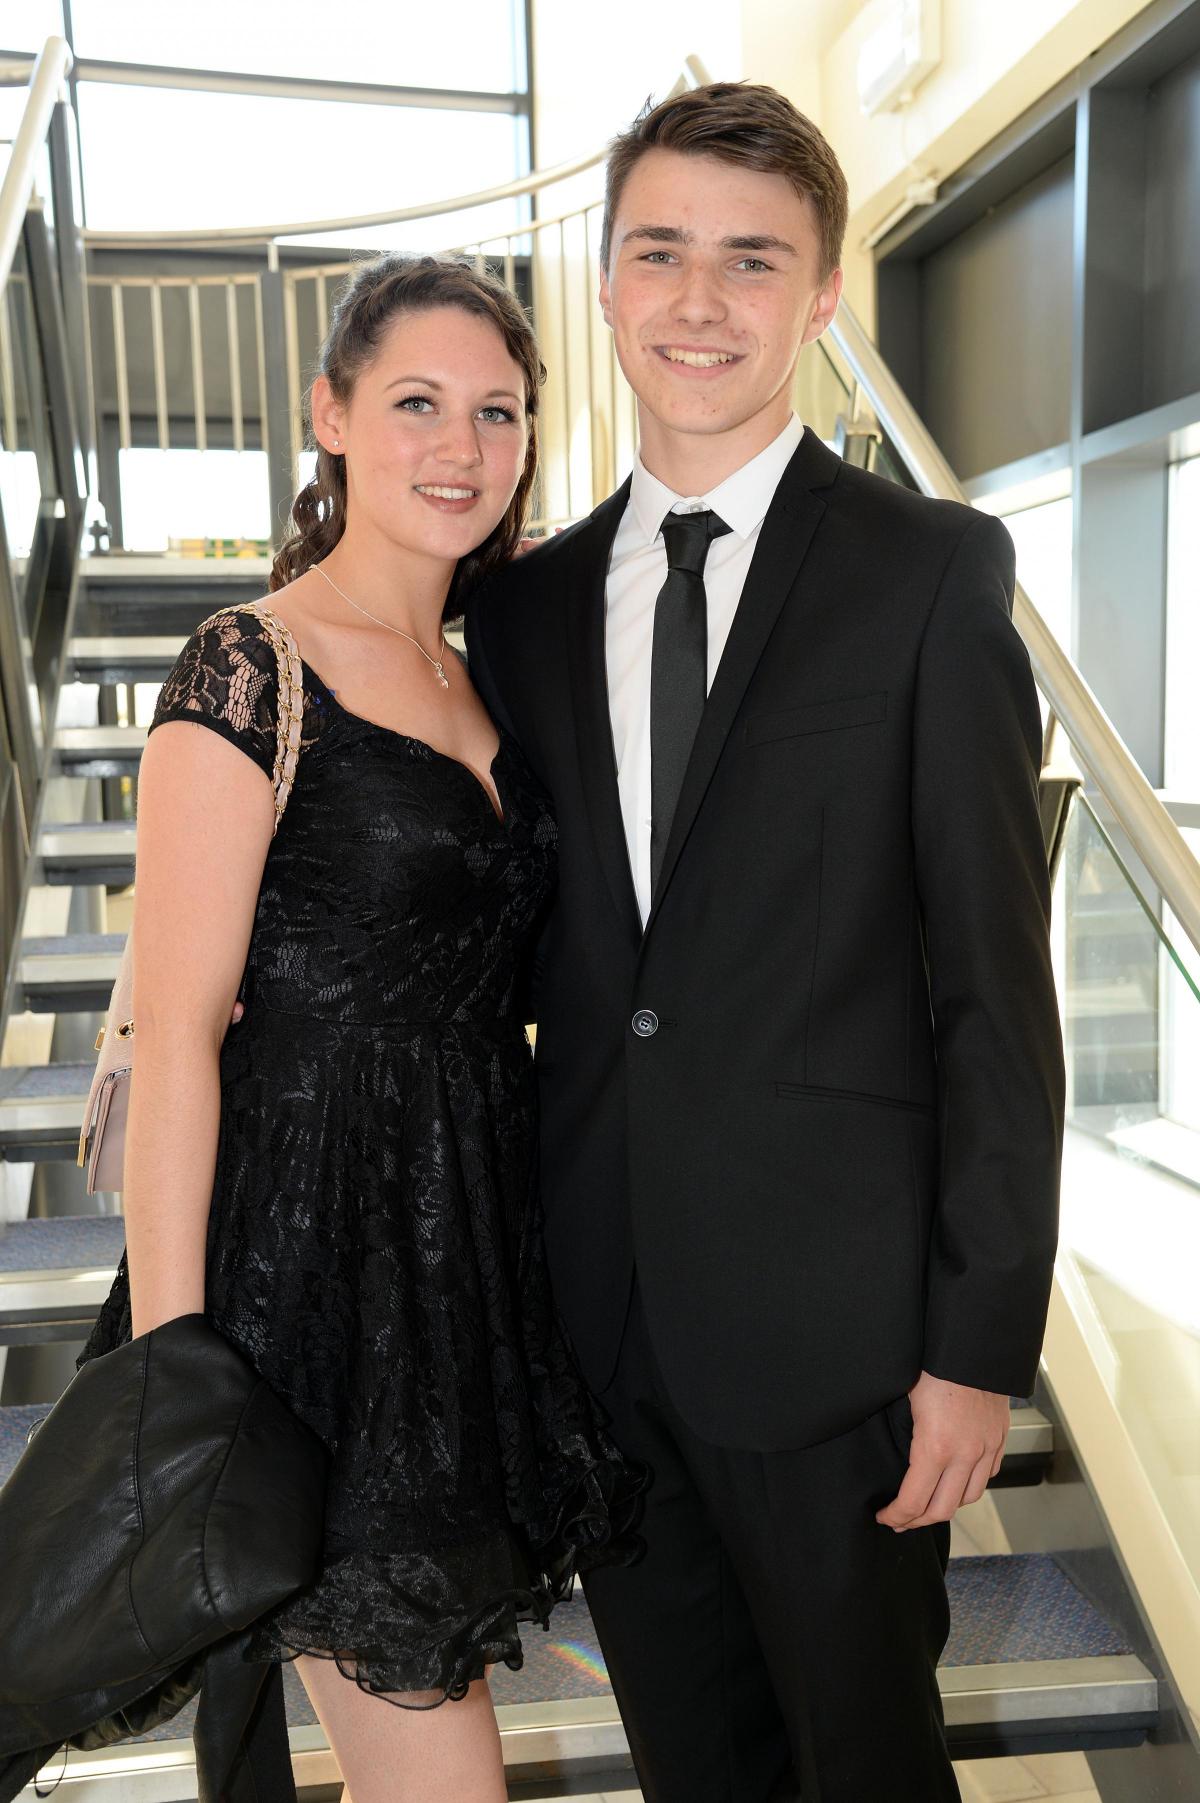 Budmouth Year 13 Prom 2015 - Pictures by John Gurd